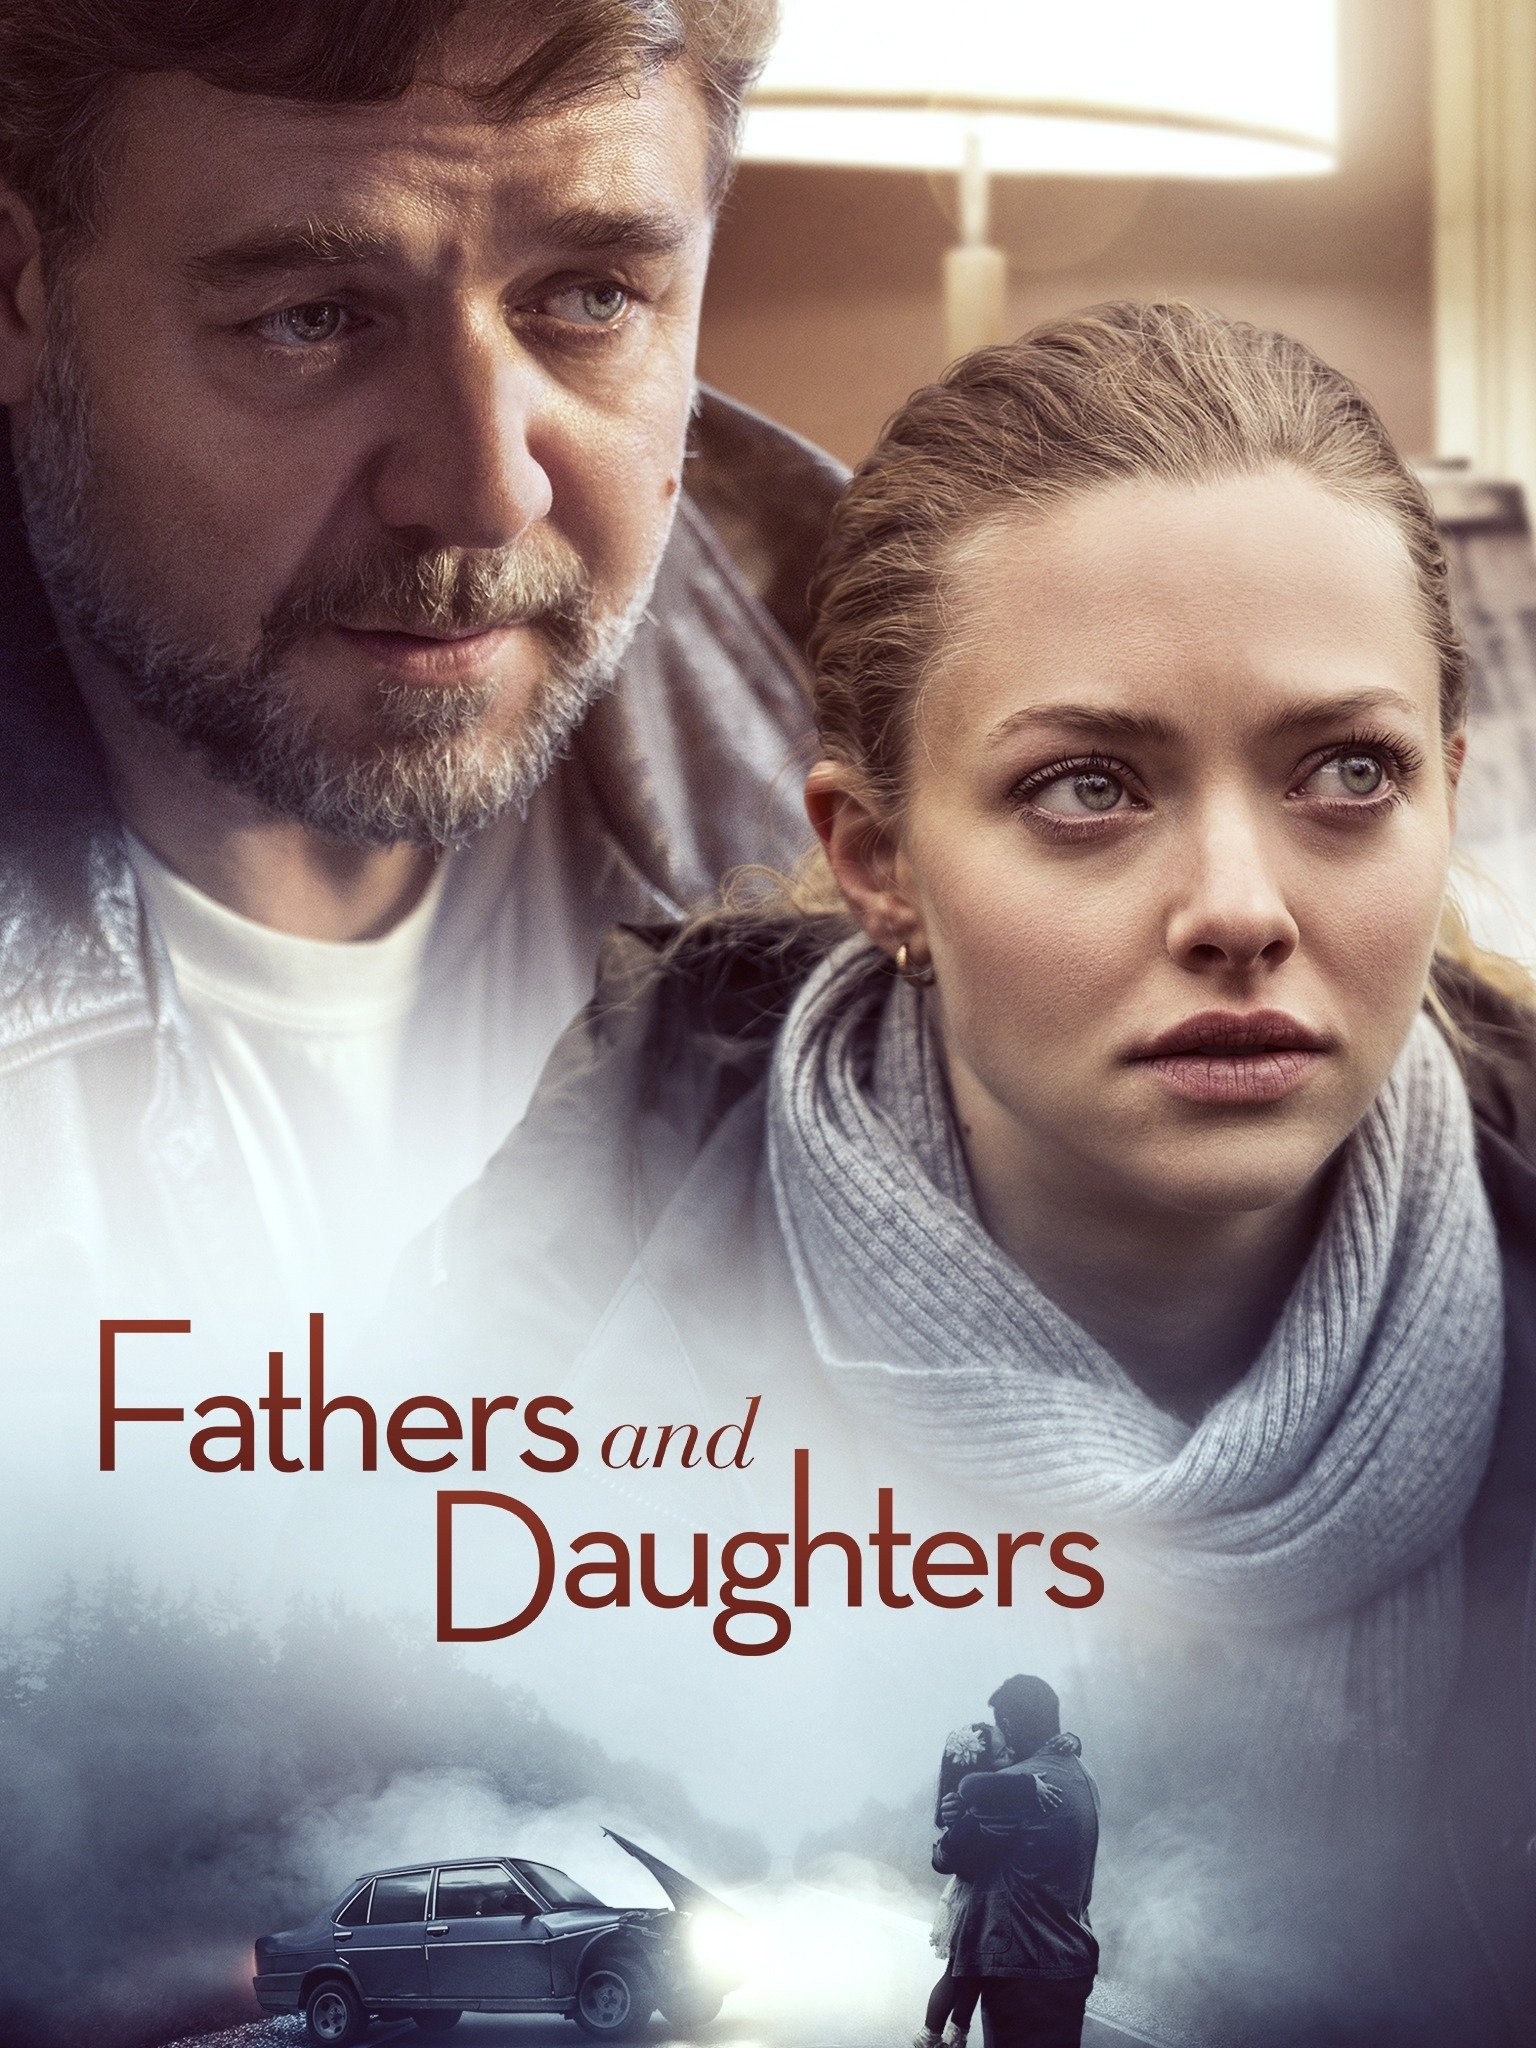 Bp 2018 Online Xxx - Fathers and Daughters - Rotten Tomatoes